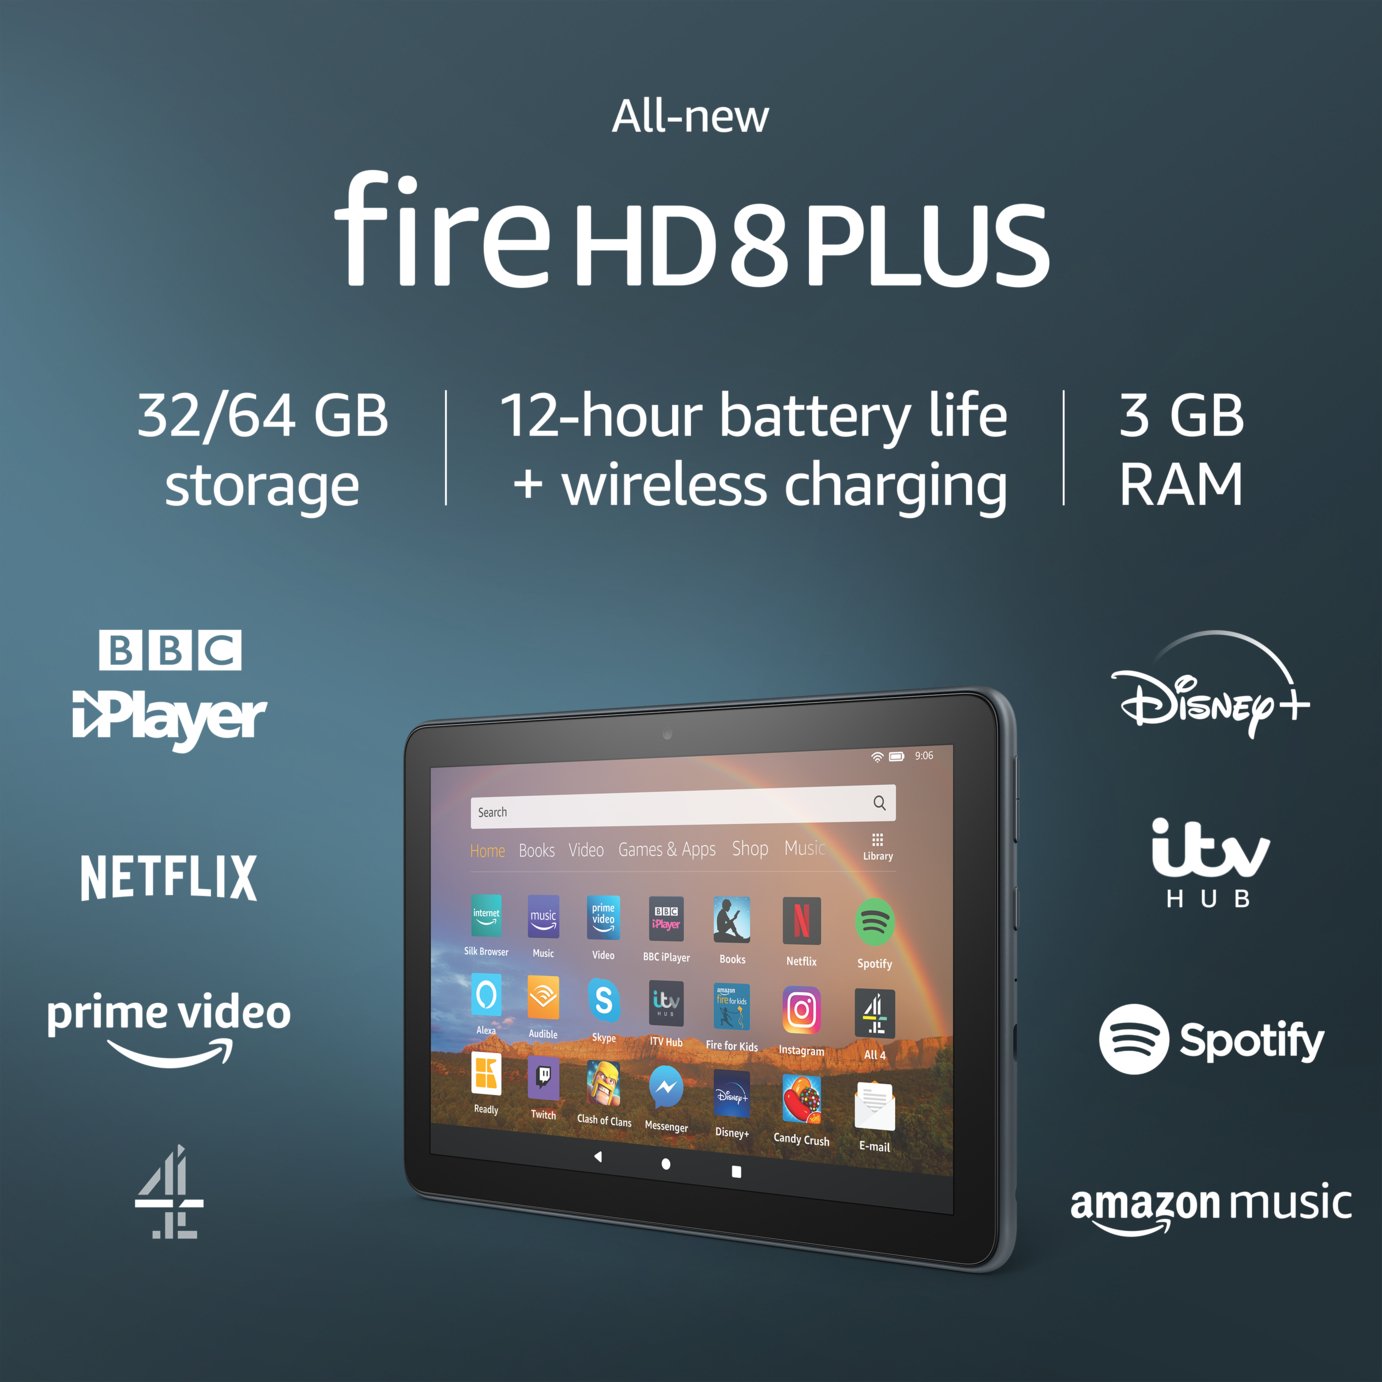 Amazon Fire HD 8 Plus Slate 8 Inch 32GB Tablet Review